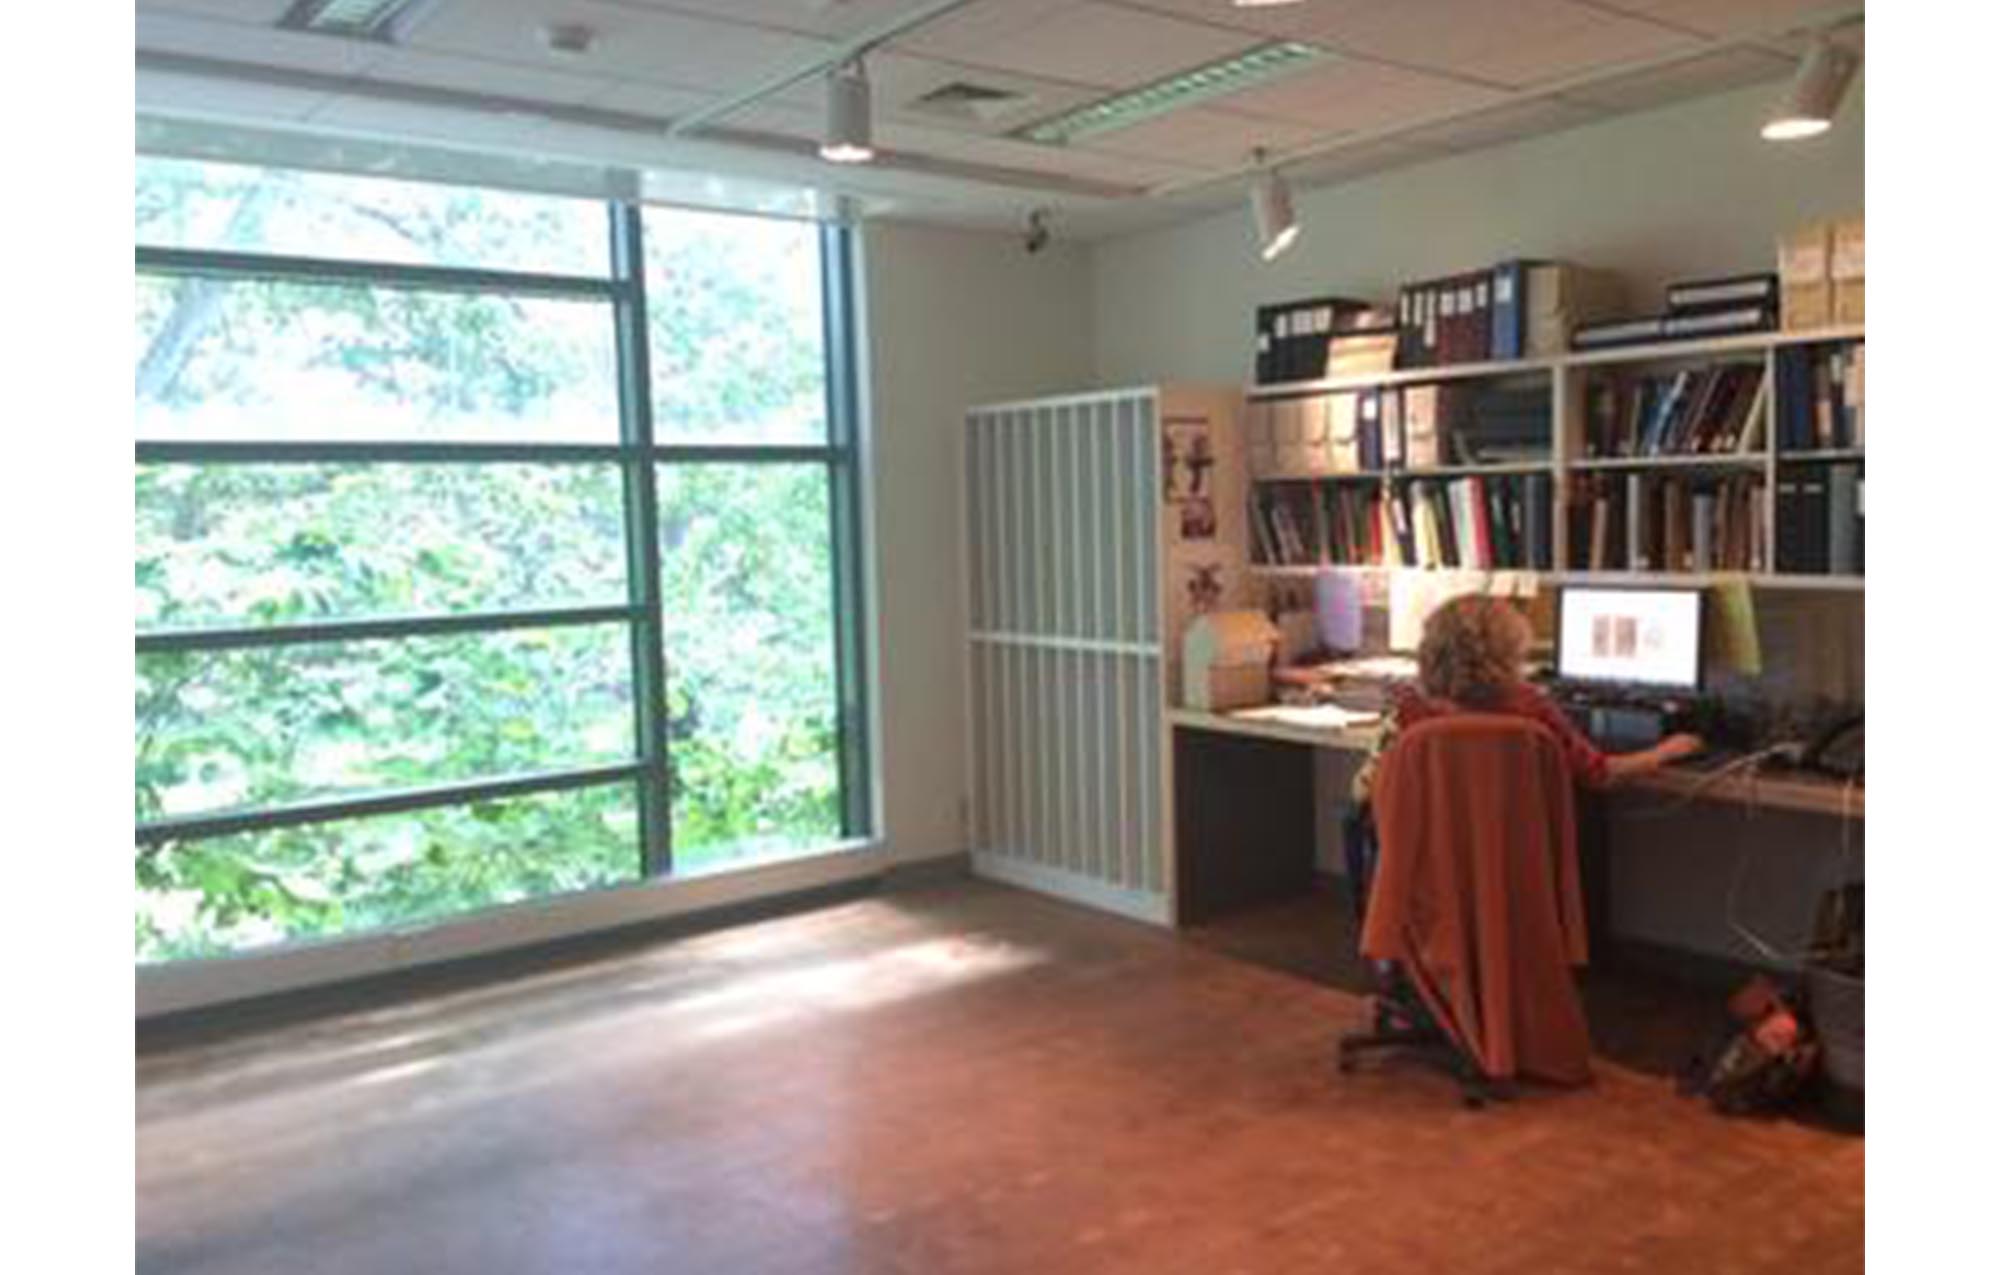 room  with wooden floors, back wall has floor-to-ceiling windows showing green trees outside. woman sits at a desk along the right wall, working at a computer